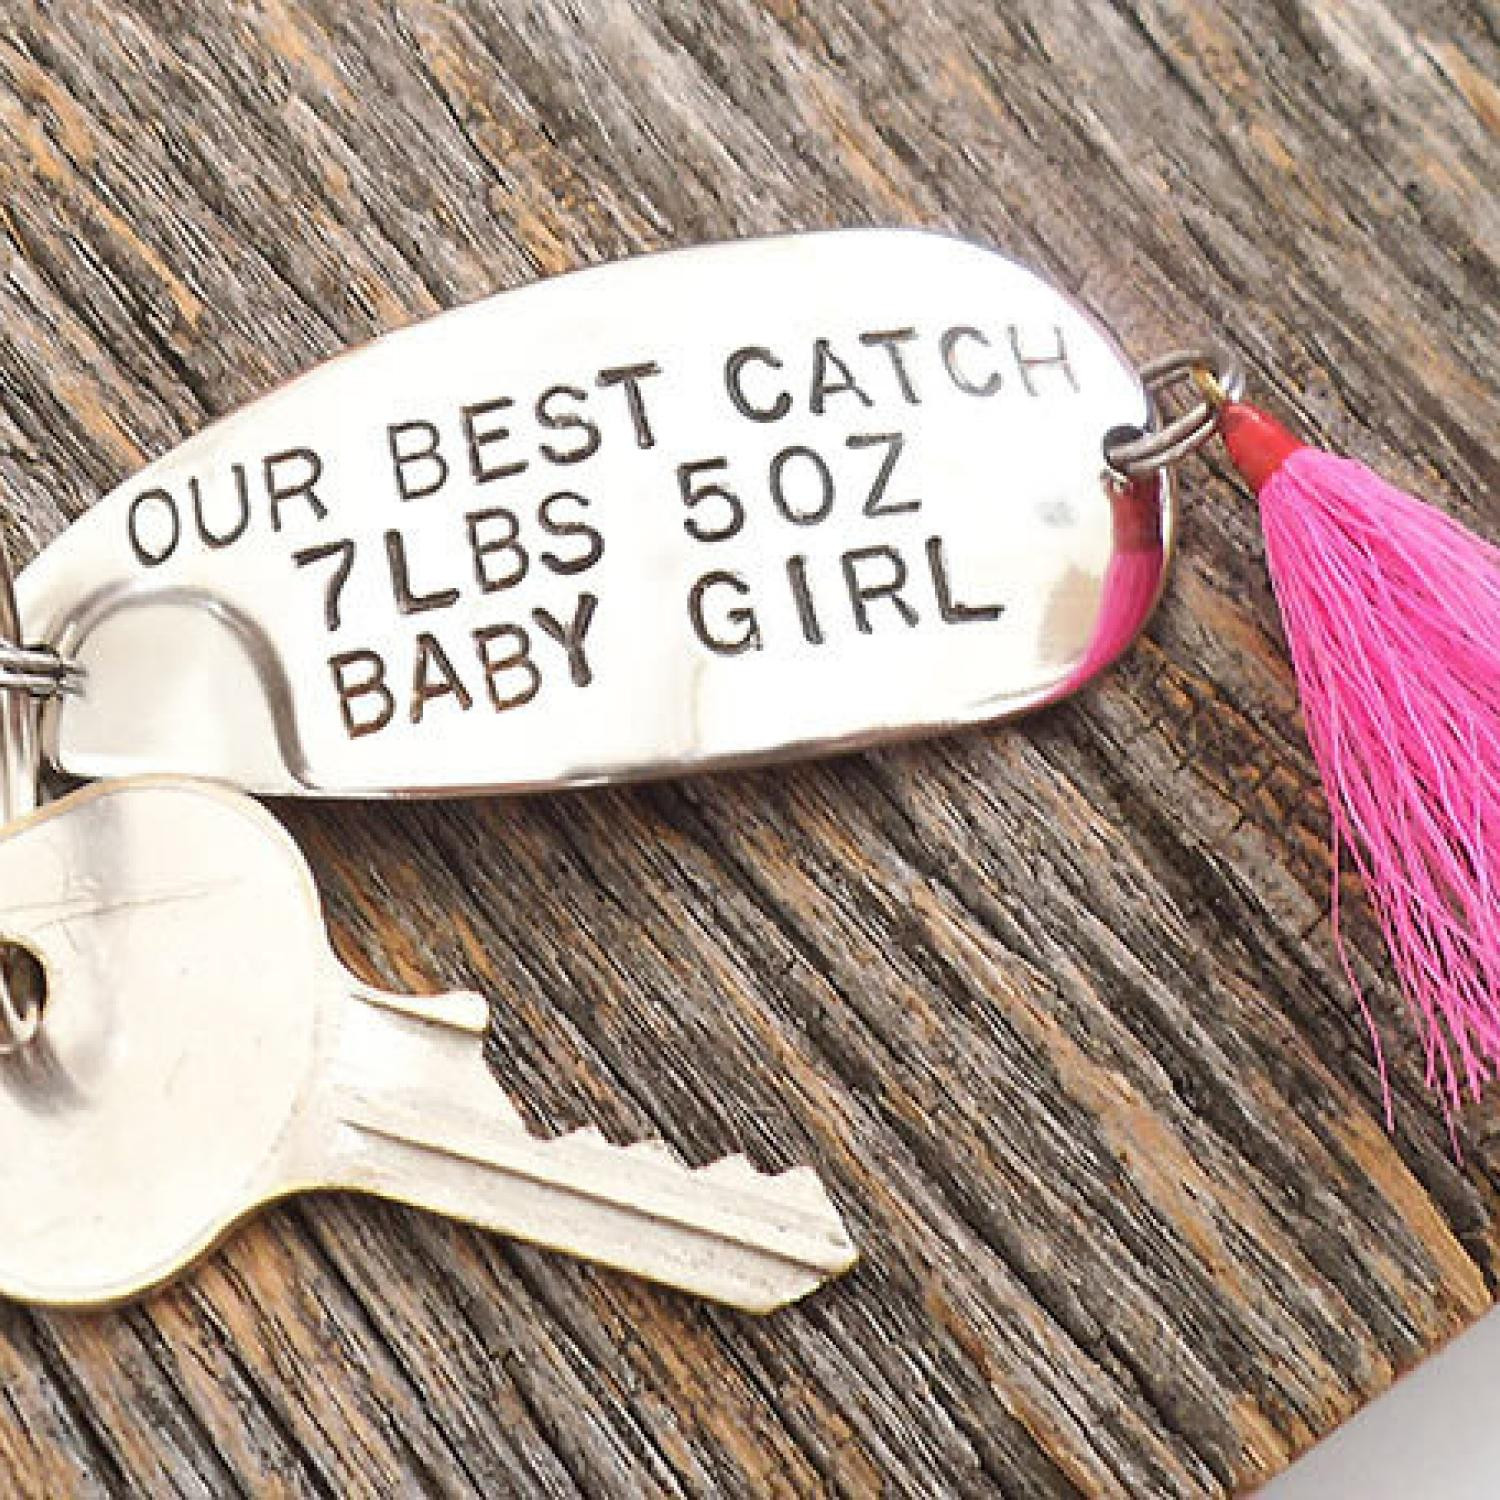 Gift For Daughter On Birth Of First Child
 10 Precious Father s Day Gift Ideas from a New Baby